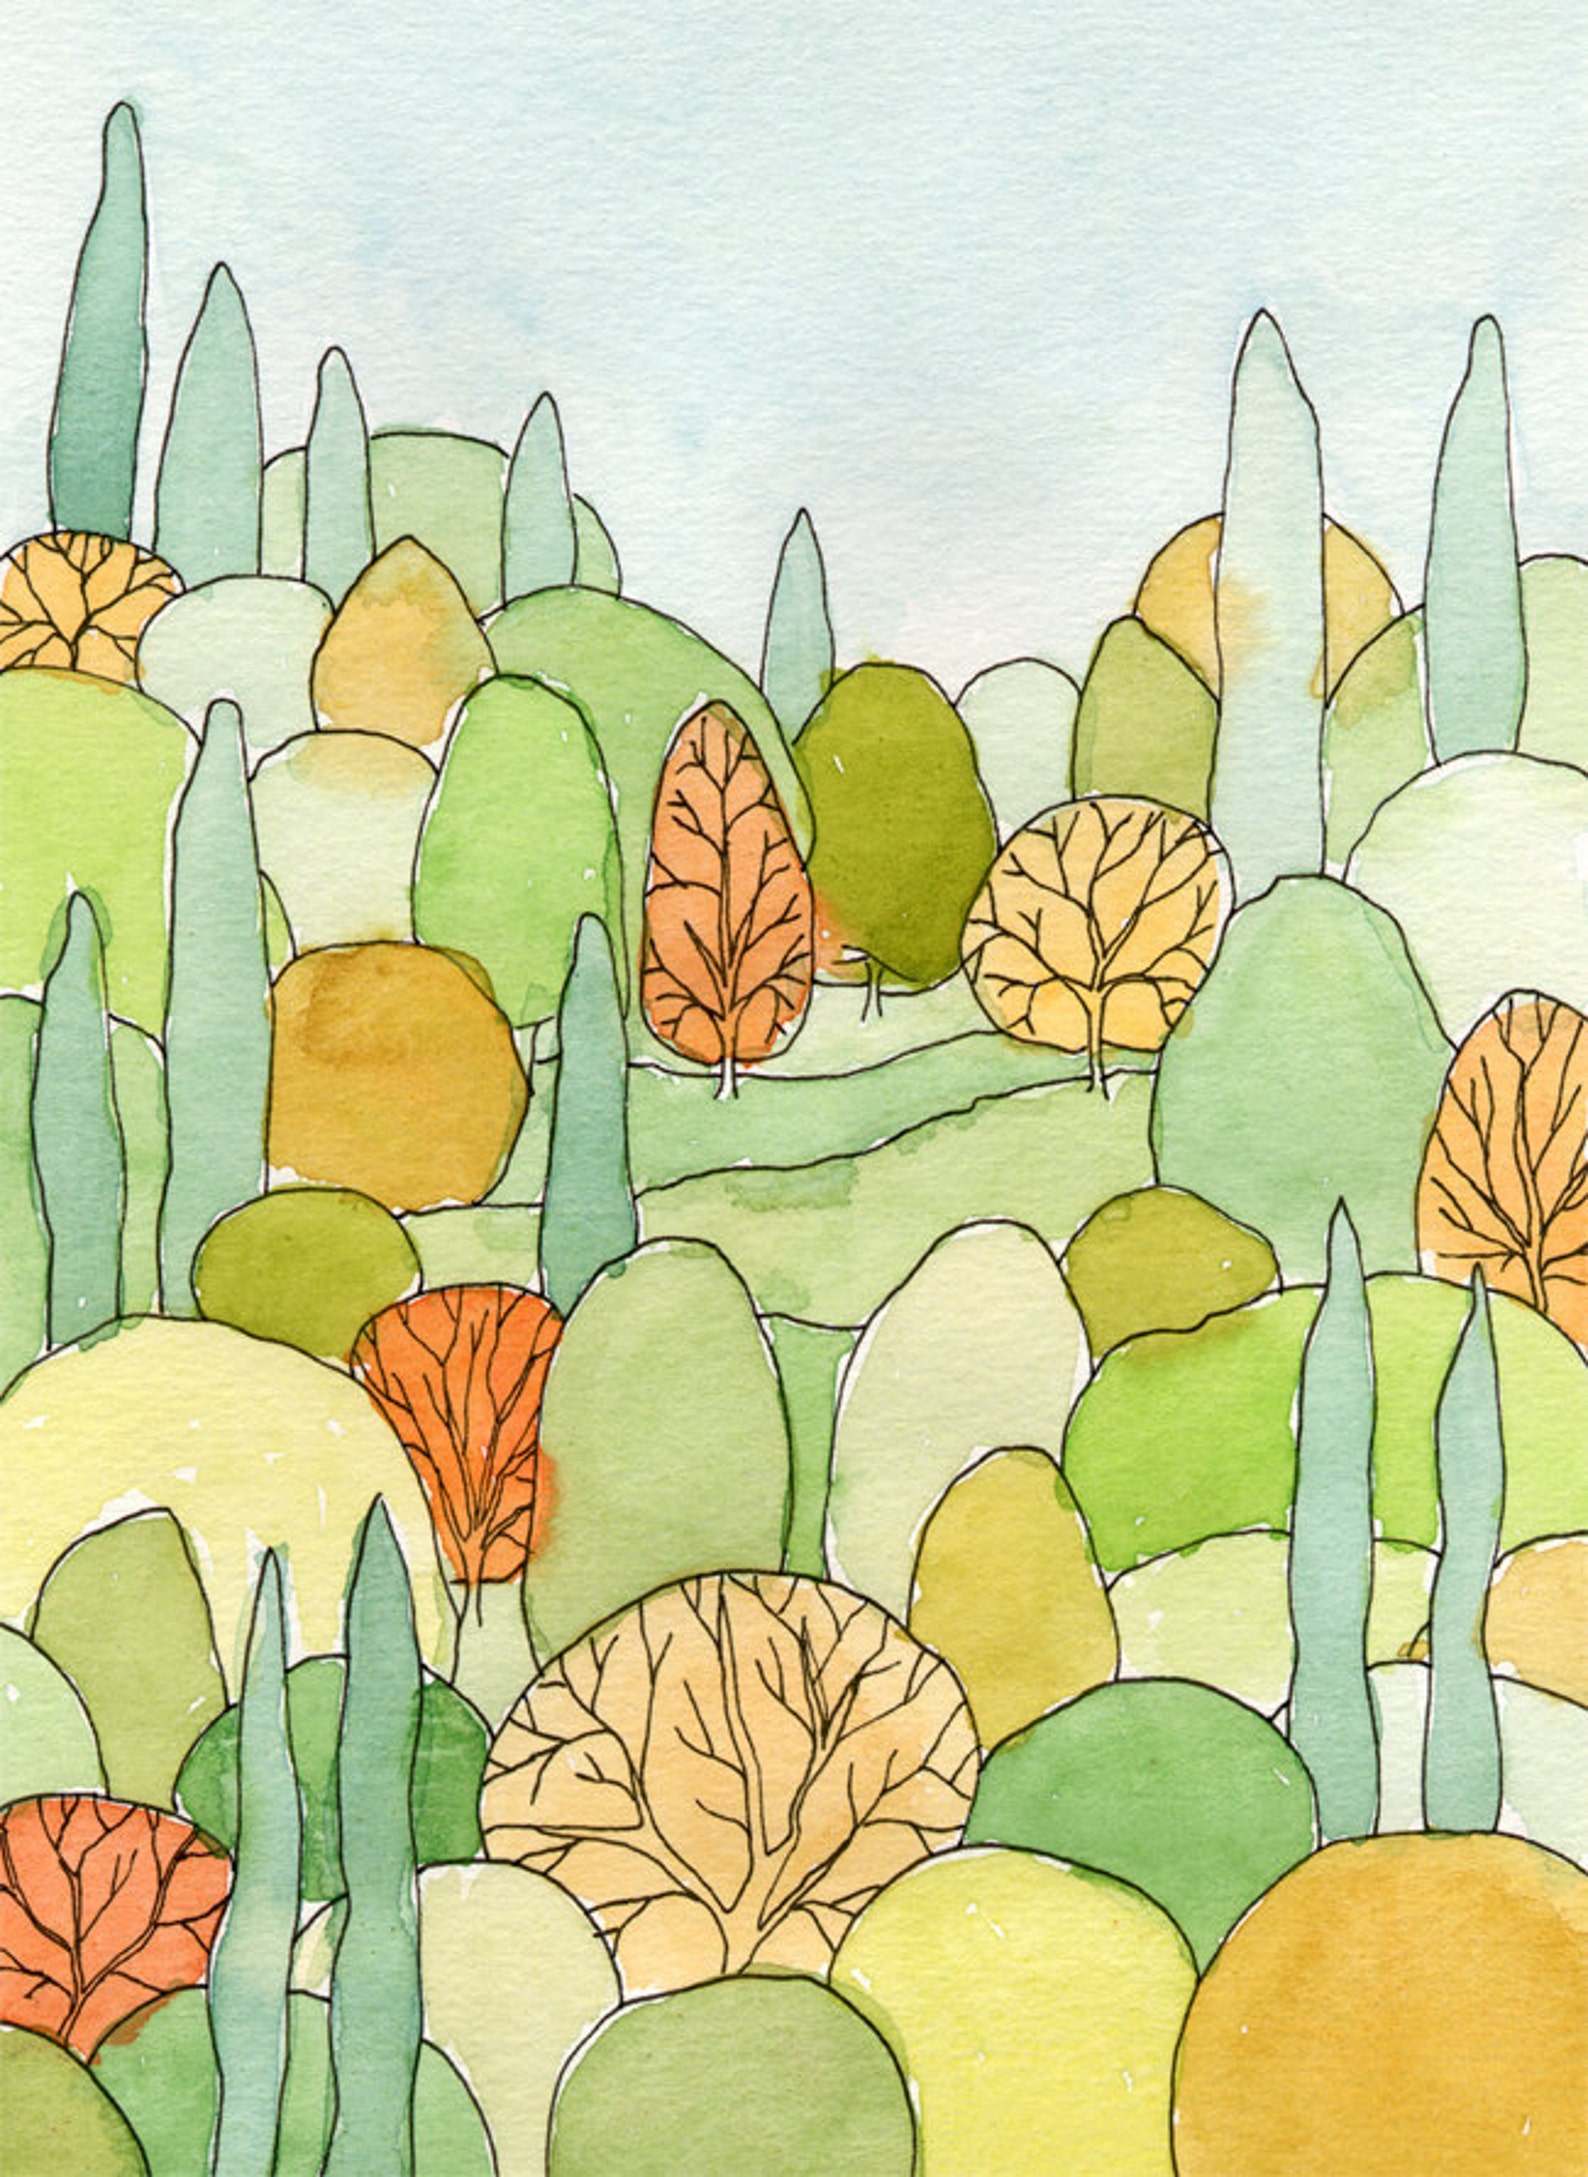 Perfect Landscape Art Print From Original Watercolor - Etsy